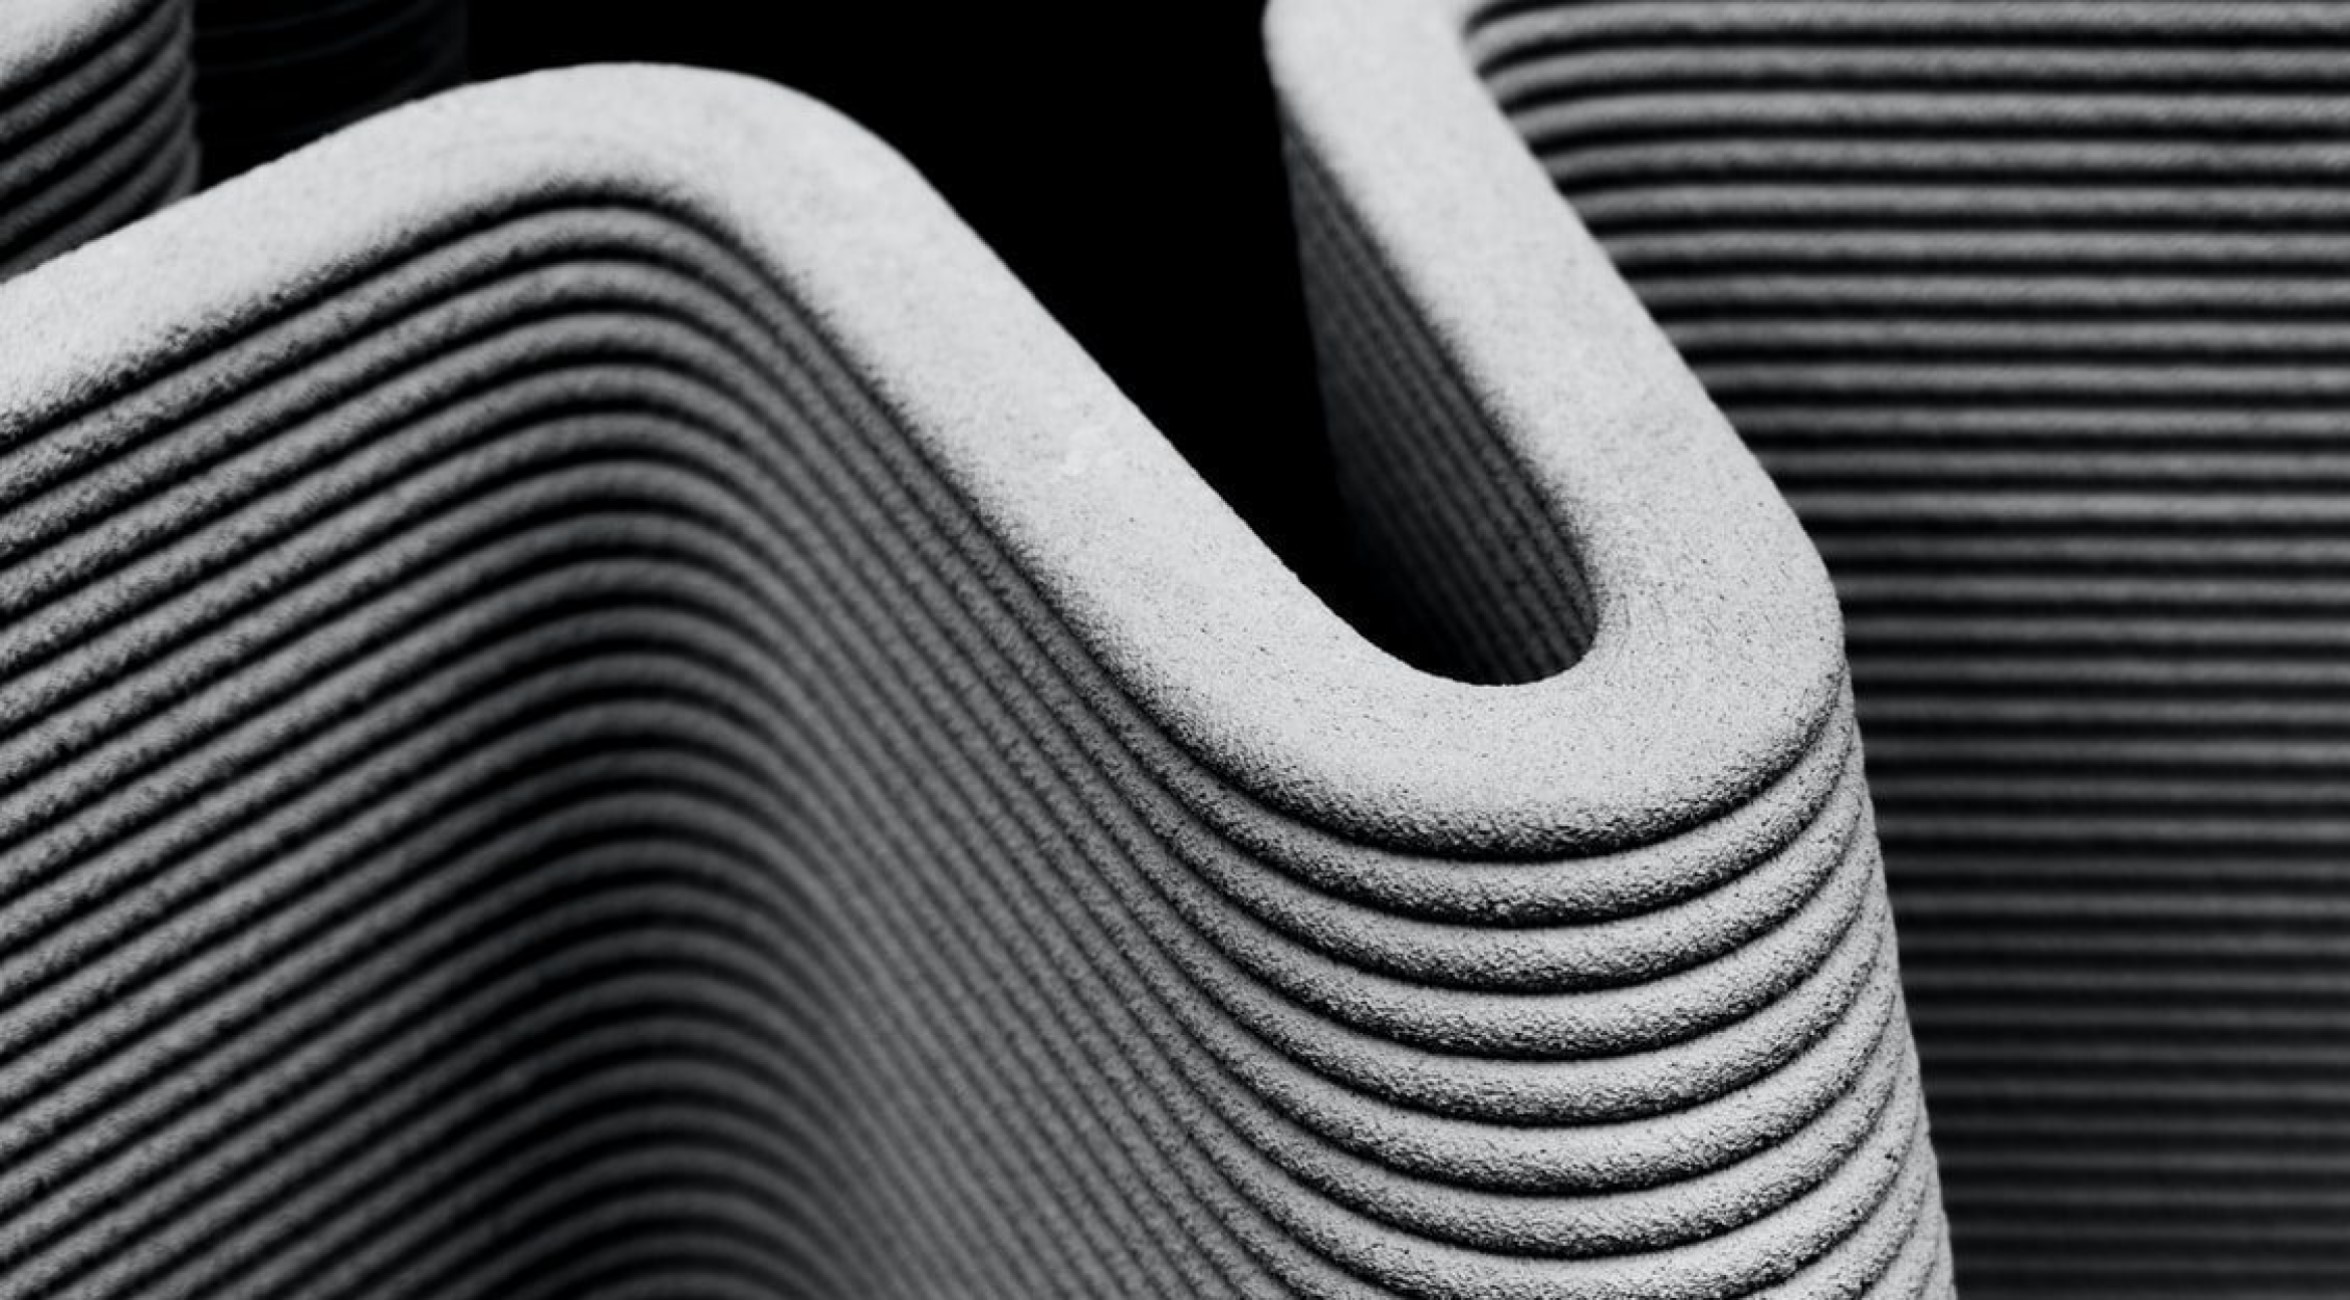 Grayscale close-up of 3D-printed surface